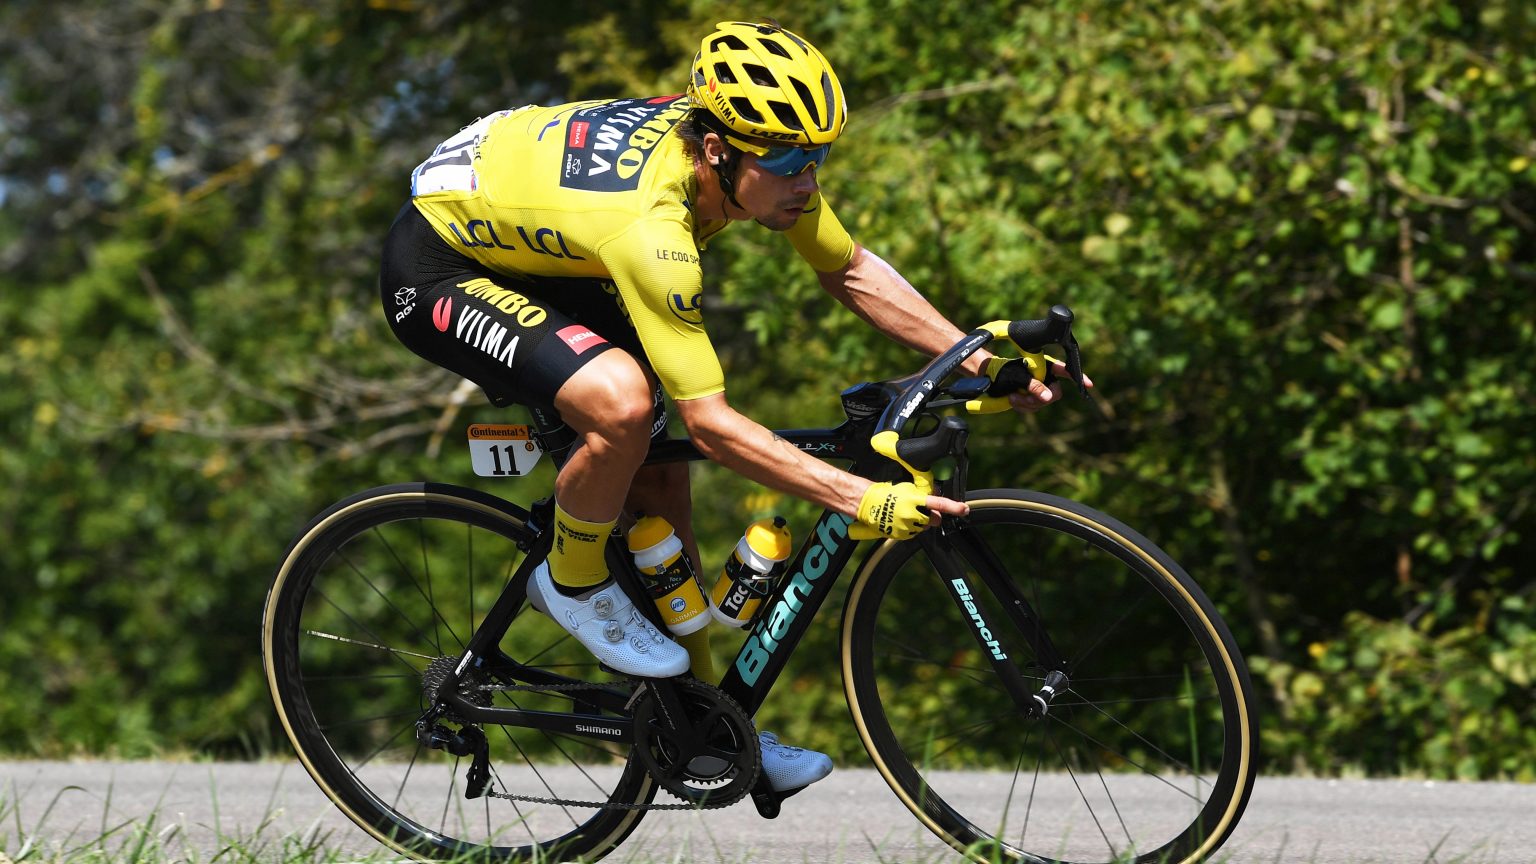 2020 Tour de France live stream: how to watch stage 16 of the race